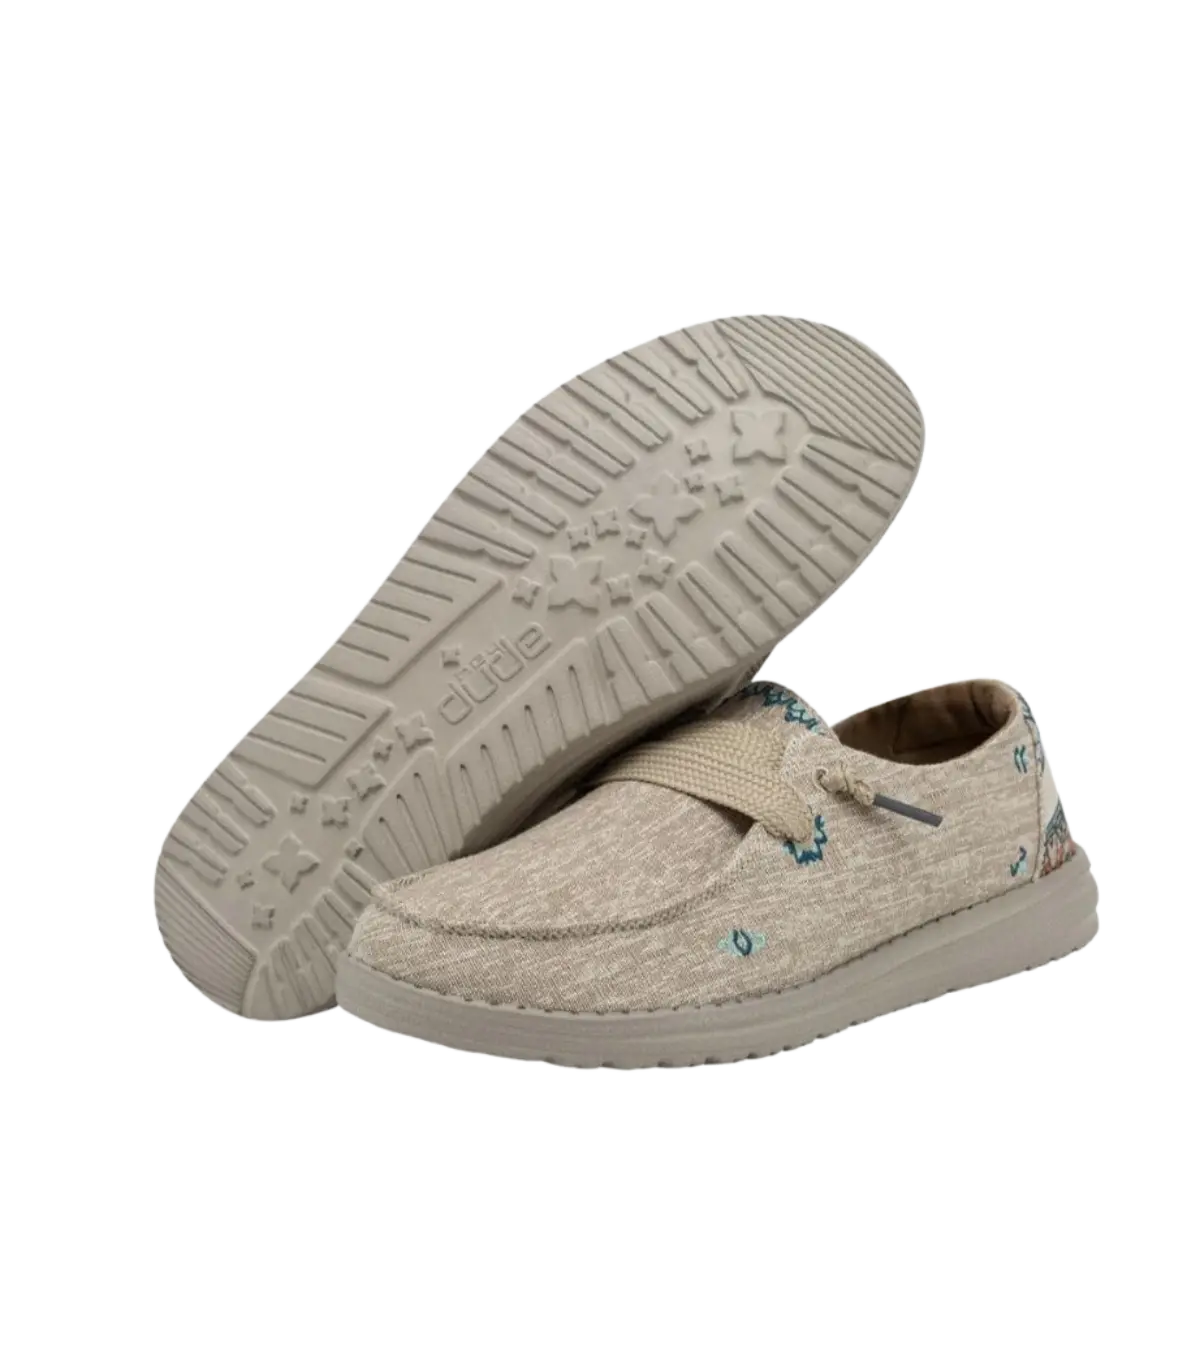 Hey Dude Wendy Size 9 Women's Shoes - Chambray Beige for sale online